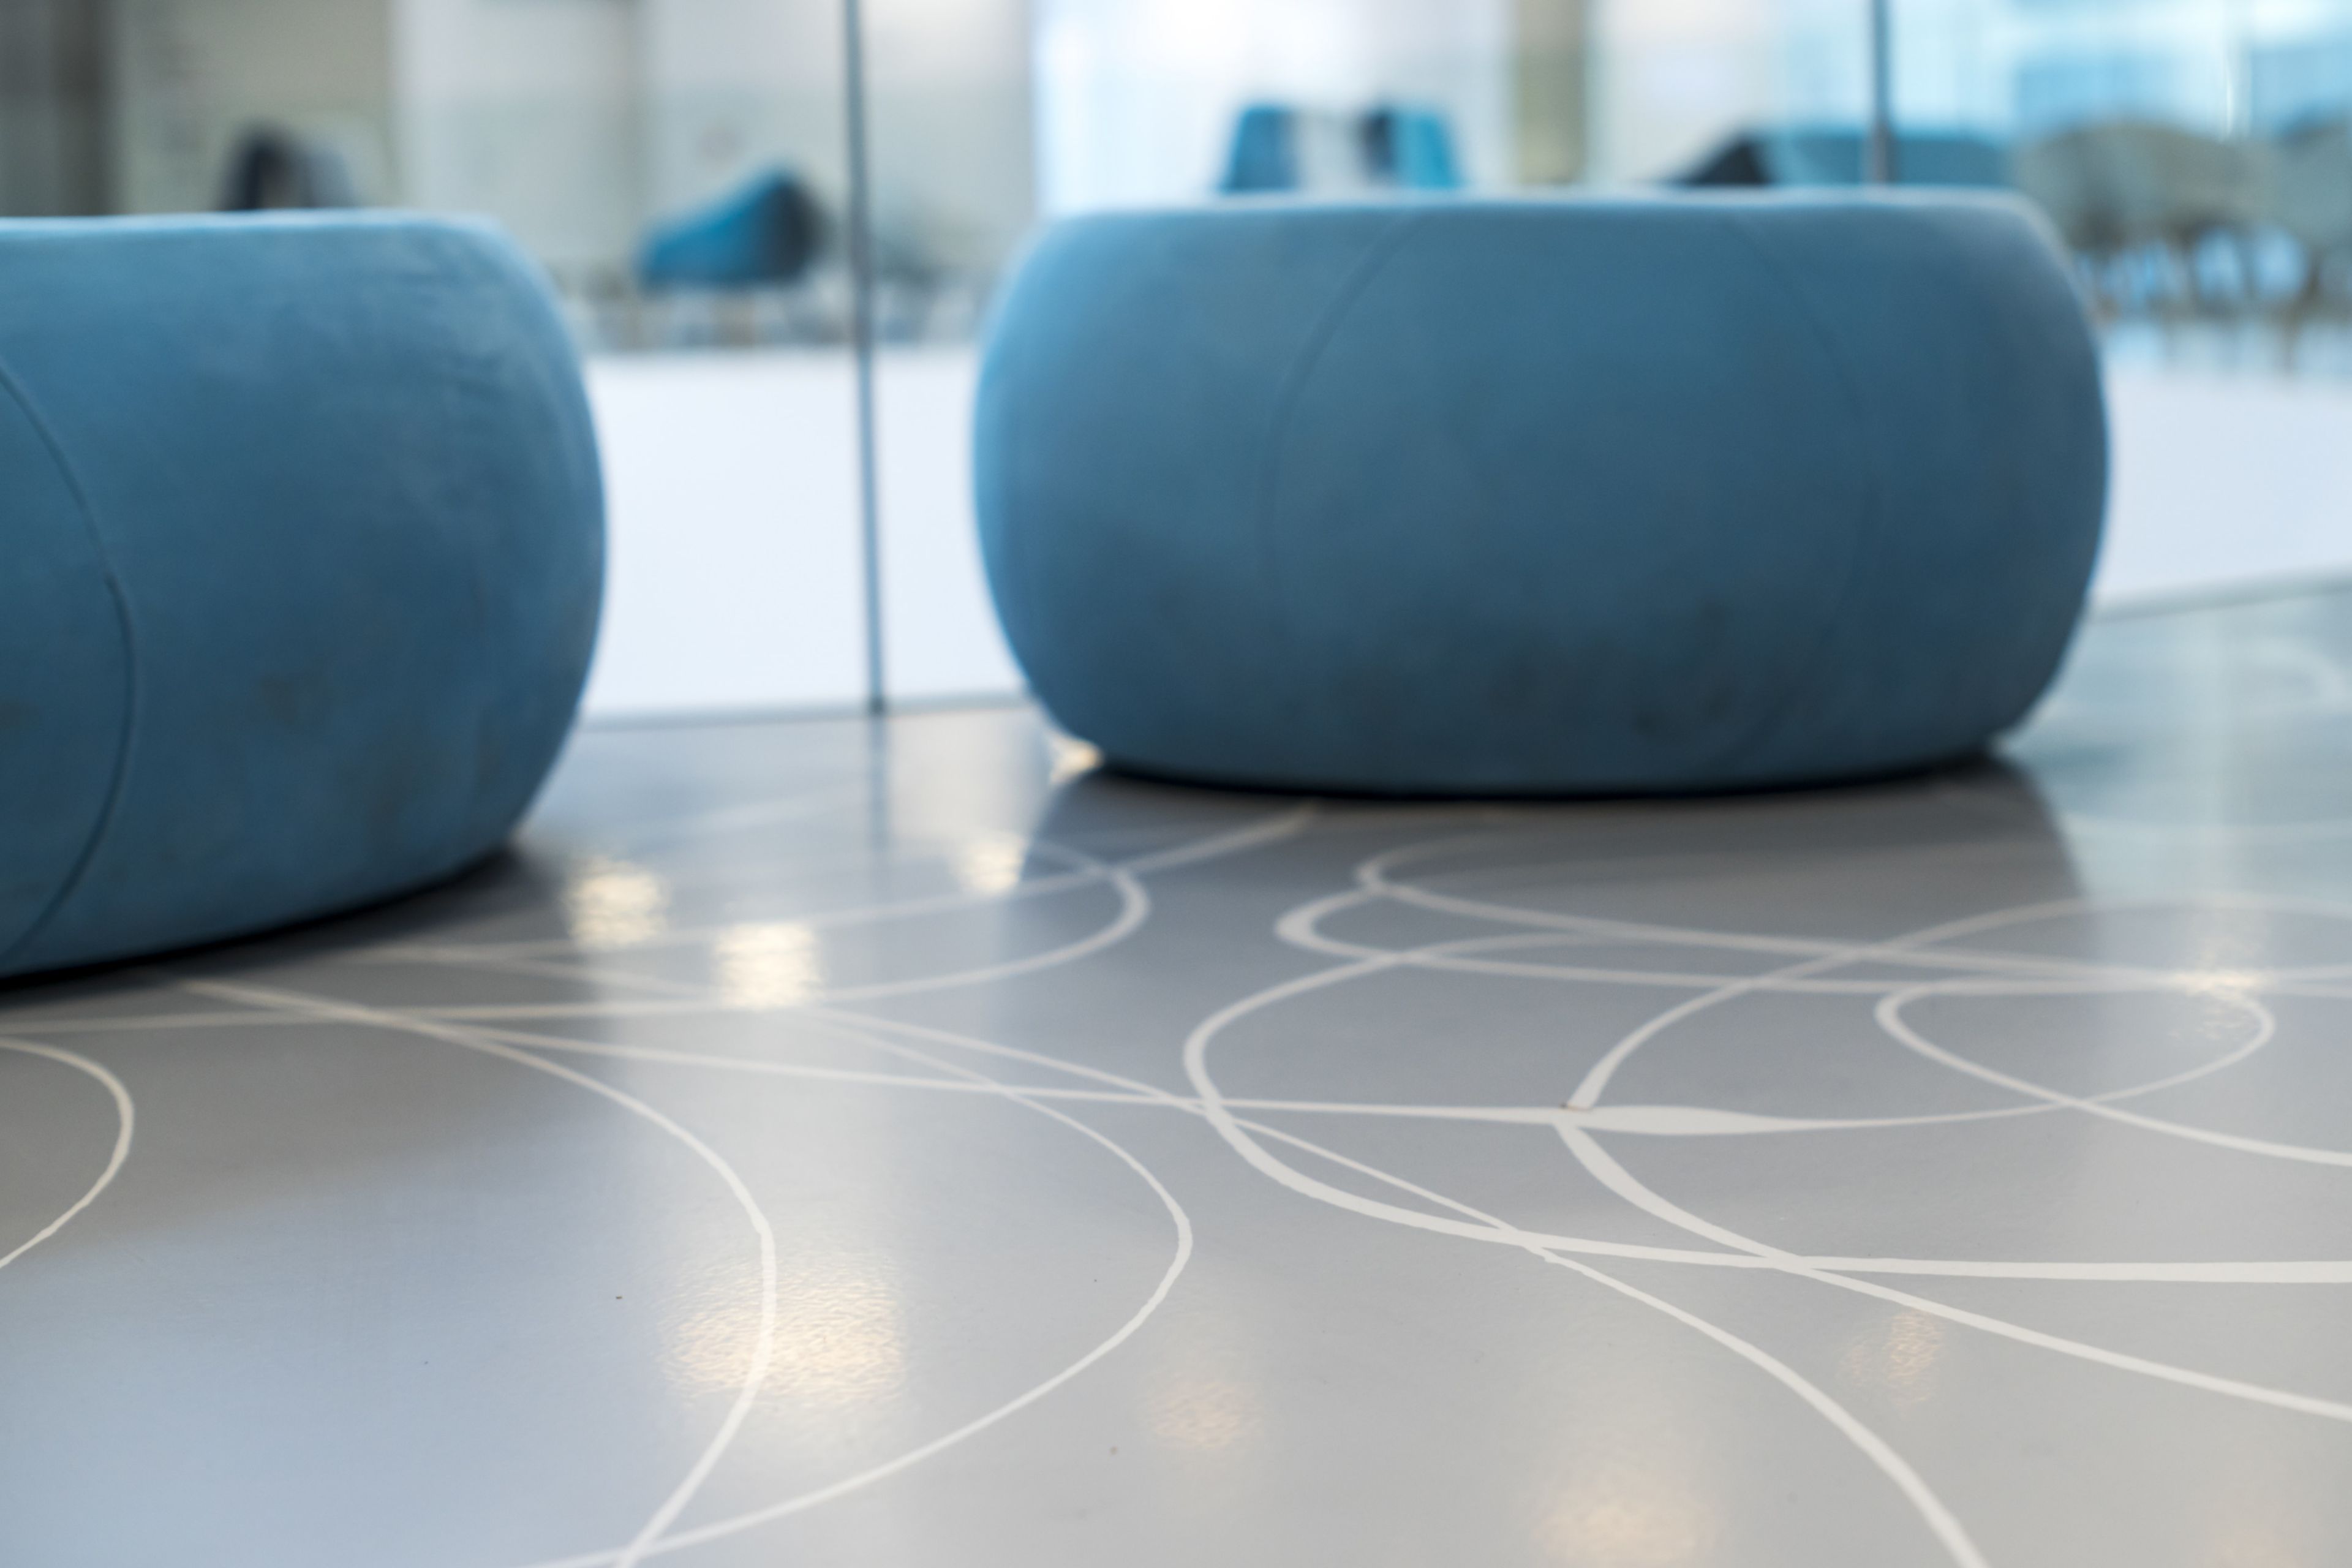 Sika ComfortFloor® grey floor with white line design pattern at Medicus Medical Center in Wroclaw, Poland